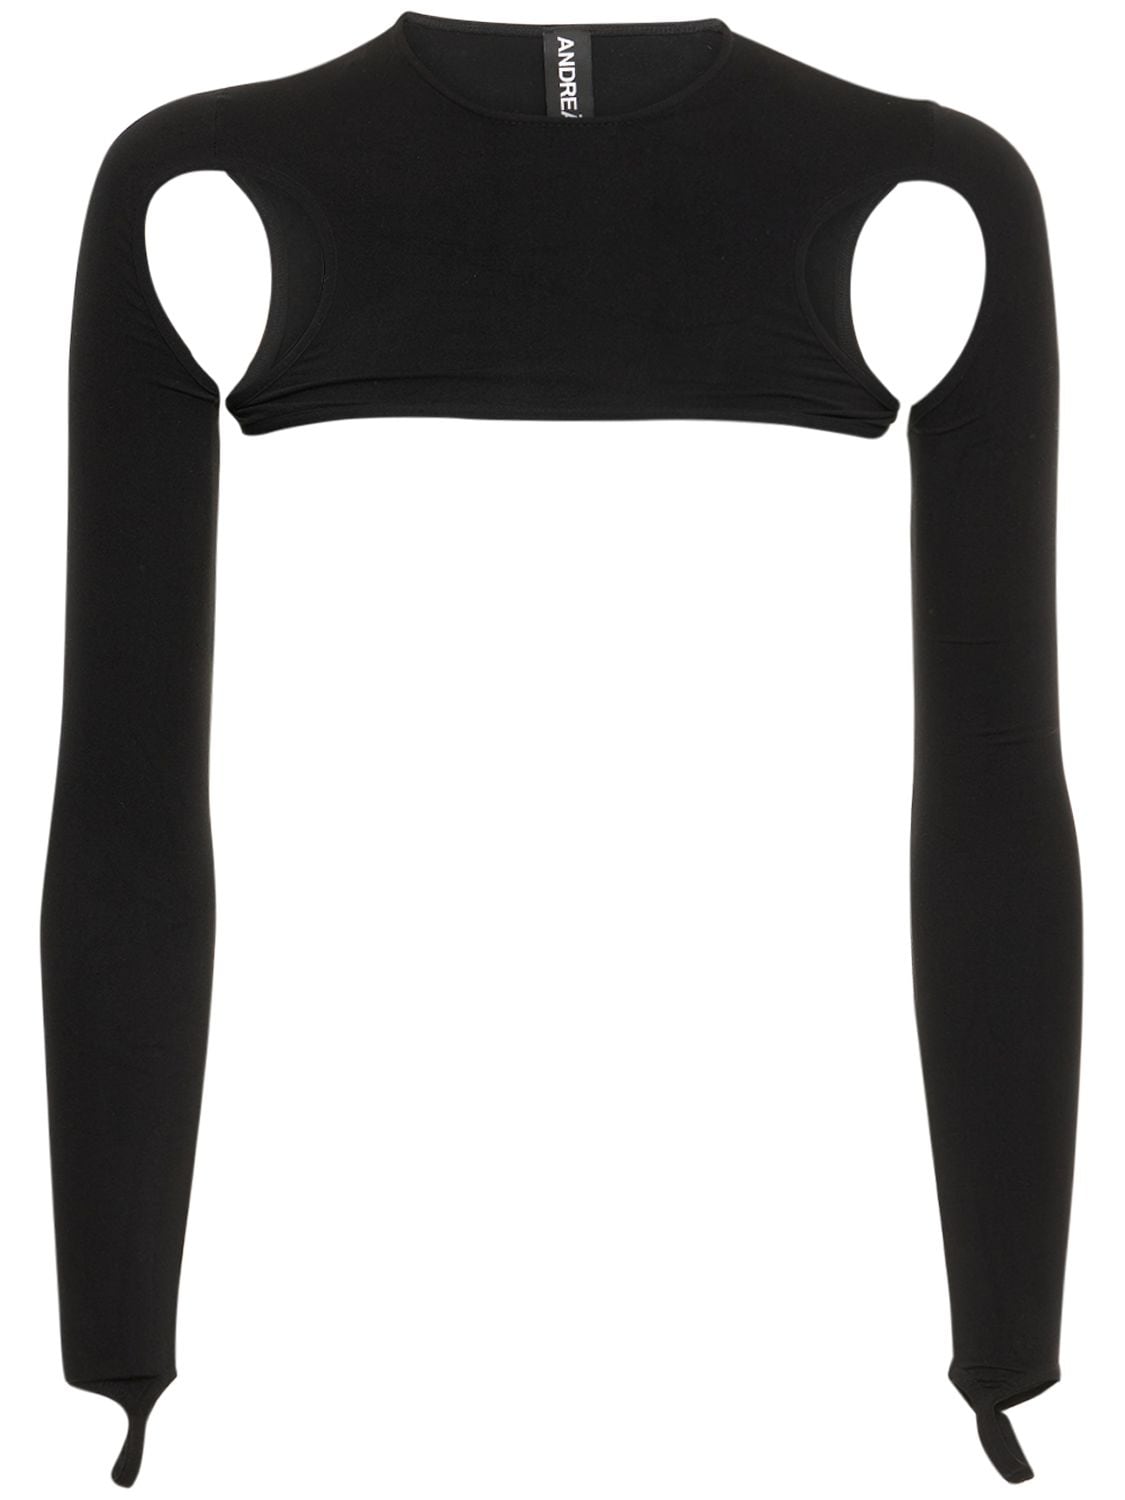 ANDREADAMO Sculpting Stretch Jersey Cut Out Harness